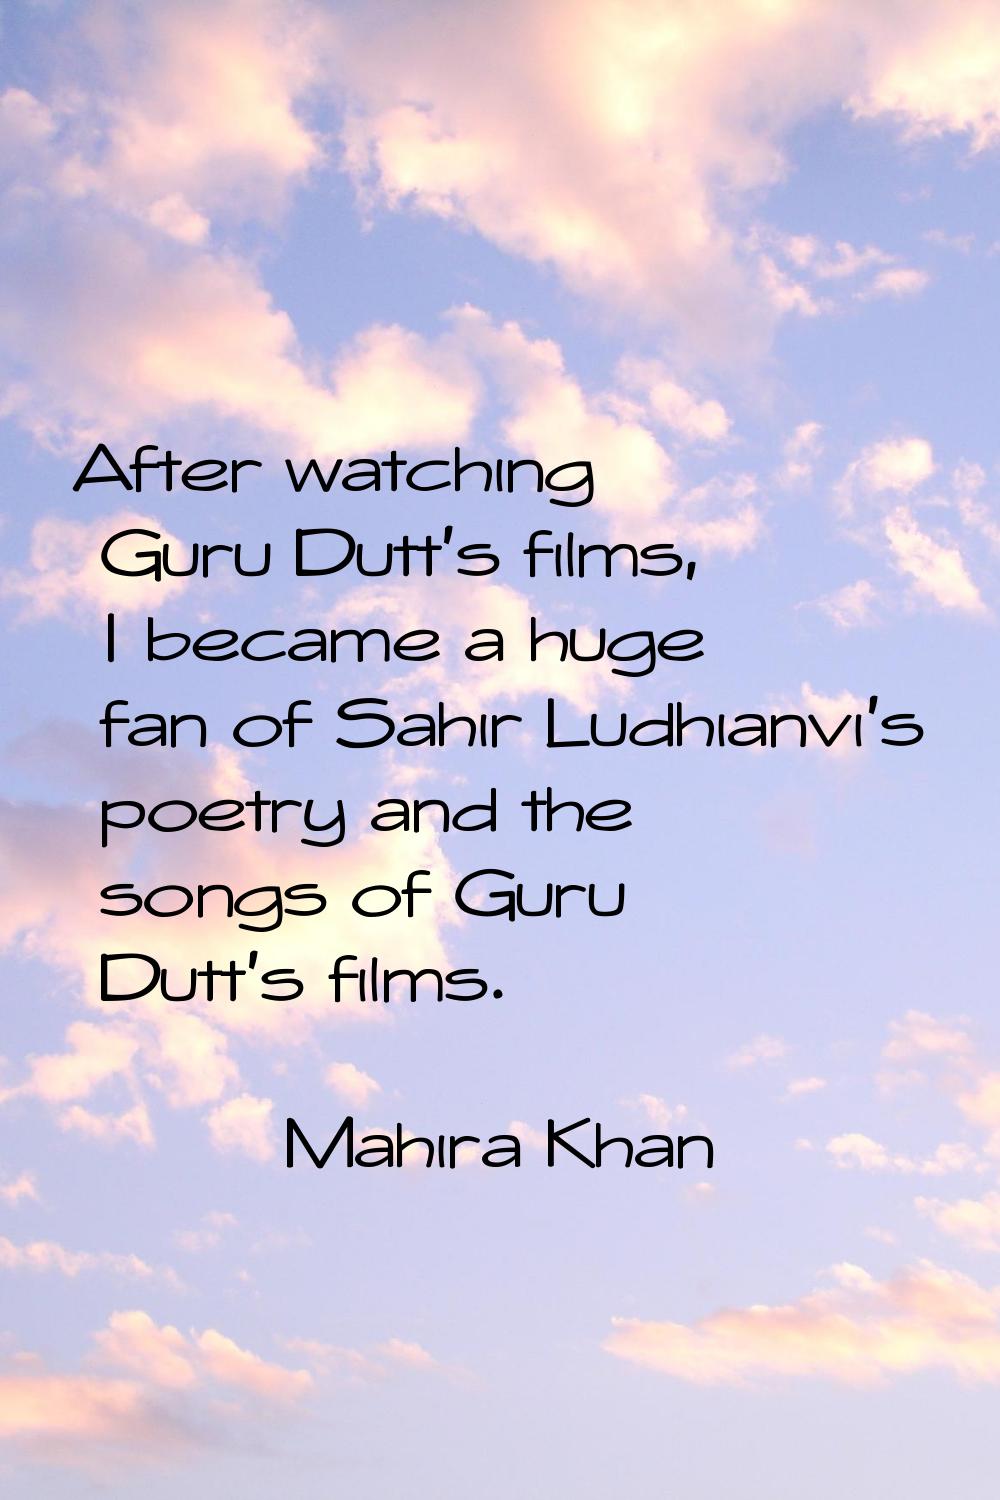 After watching Guru Dutt's films, I became a huge fan of Sahir Ludhianvi's poetry and the songs of 